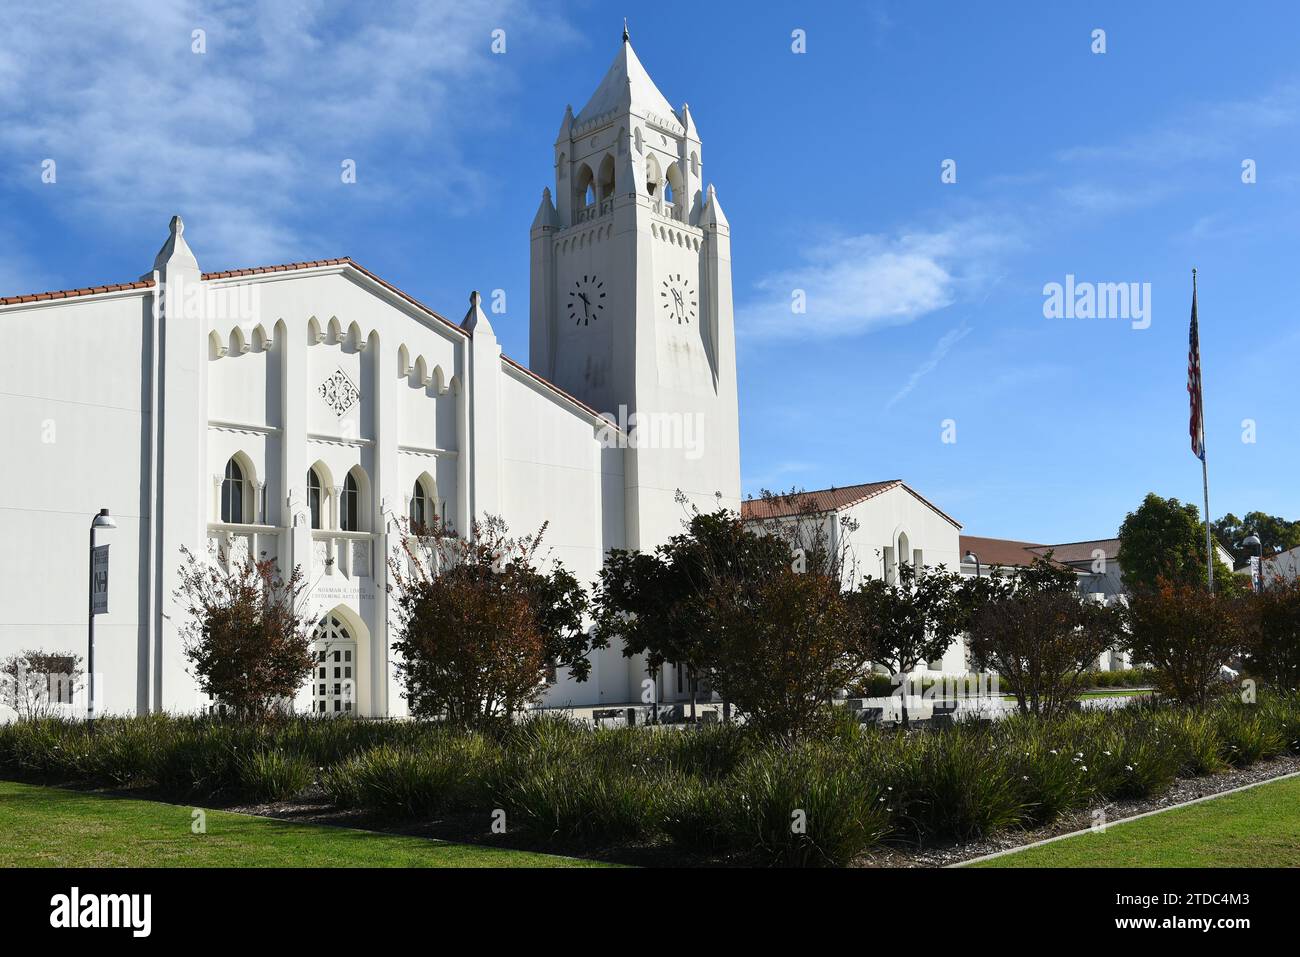 NEWPORT BEACH, CALIFORNIA - 17 DEC 2023: The Robbins-Loats Performing Arts building and Clock Tower on the Campus of Newport Harbor High School. Stock Photo